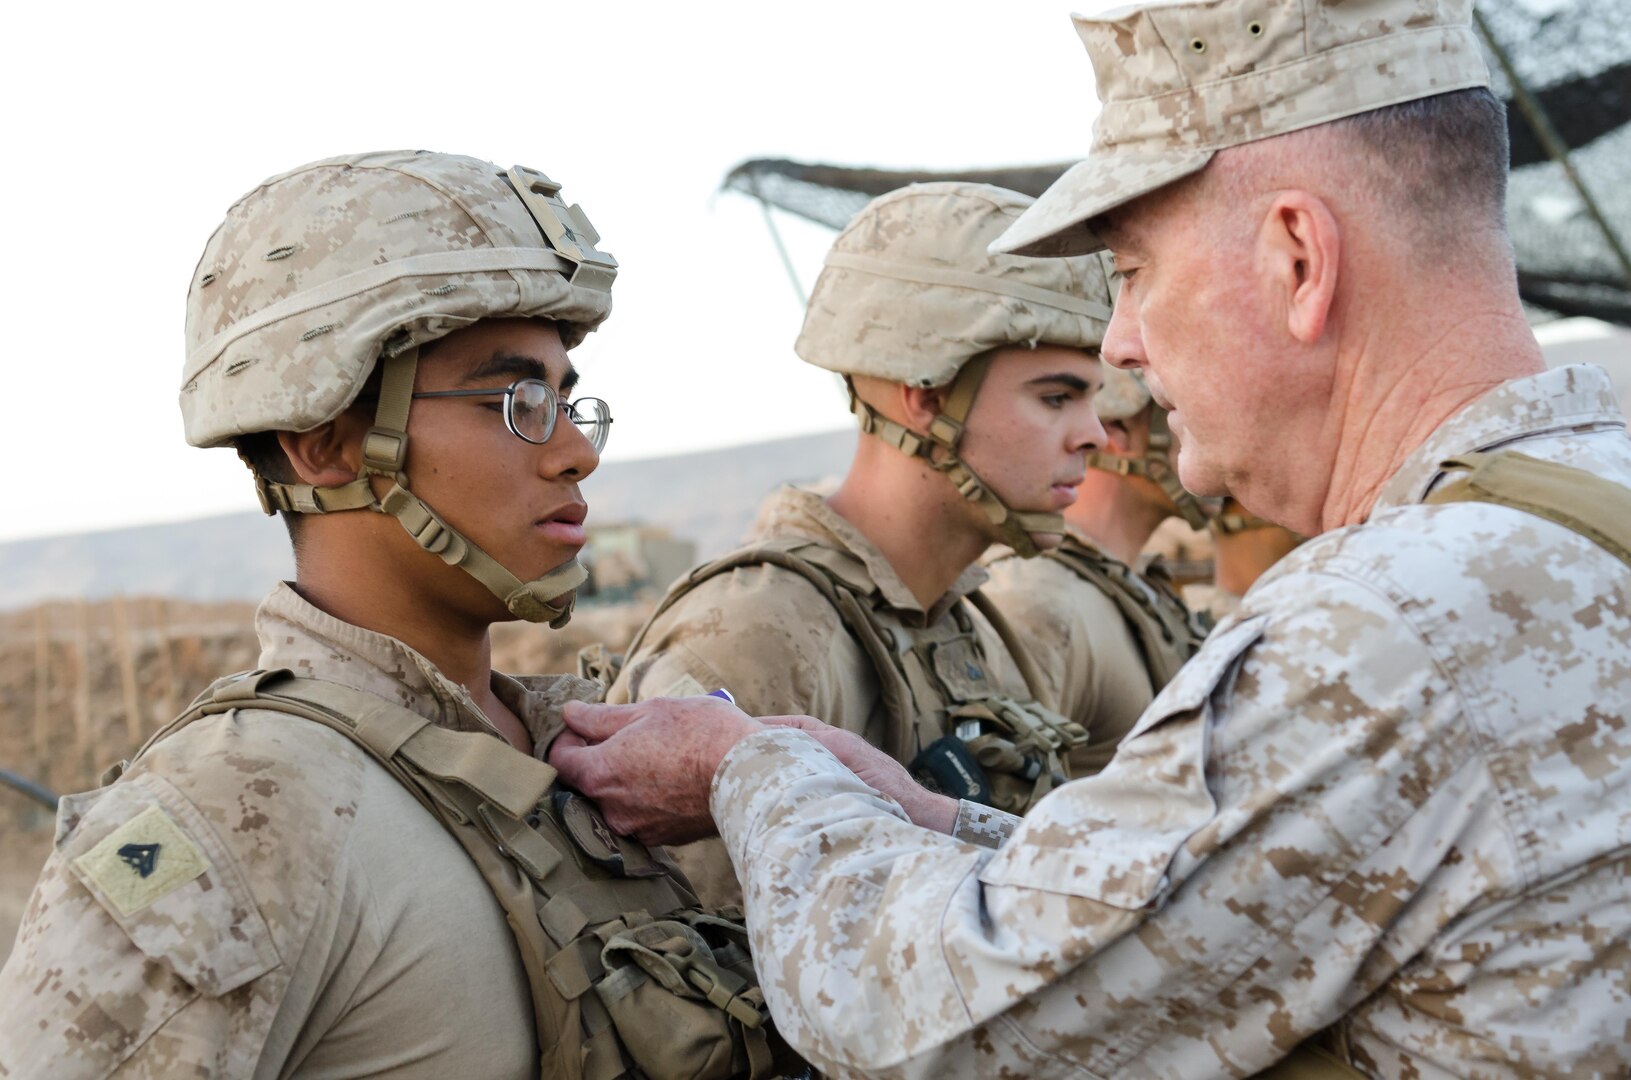 Chairman of the Joint Chiefs of Staff Gen. Joseph Dunford presents U.S. Marine Cpl.  William Crisostomosfelipe, a native of Orange, California, with the Purple Heart during a ceremony at Kara Soar Base, Makhmur, Iraq, April 22, 2016. Crisostomosfelipe, a field artillery cannon crewman assigned to Battery E, 26th Marine Expeditionary Unit, was awarded his Purple Hearts at the very site he was wounded March 19. (U.S. Army Photo by Staff Sgt. Peter J. Berardi)